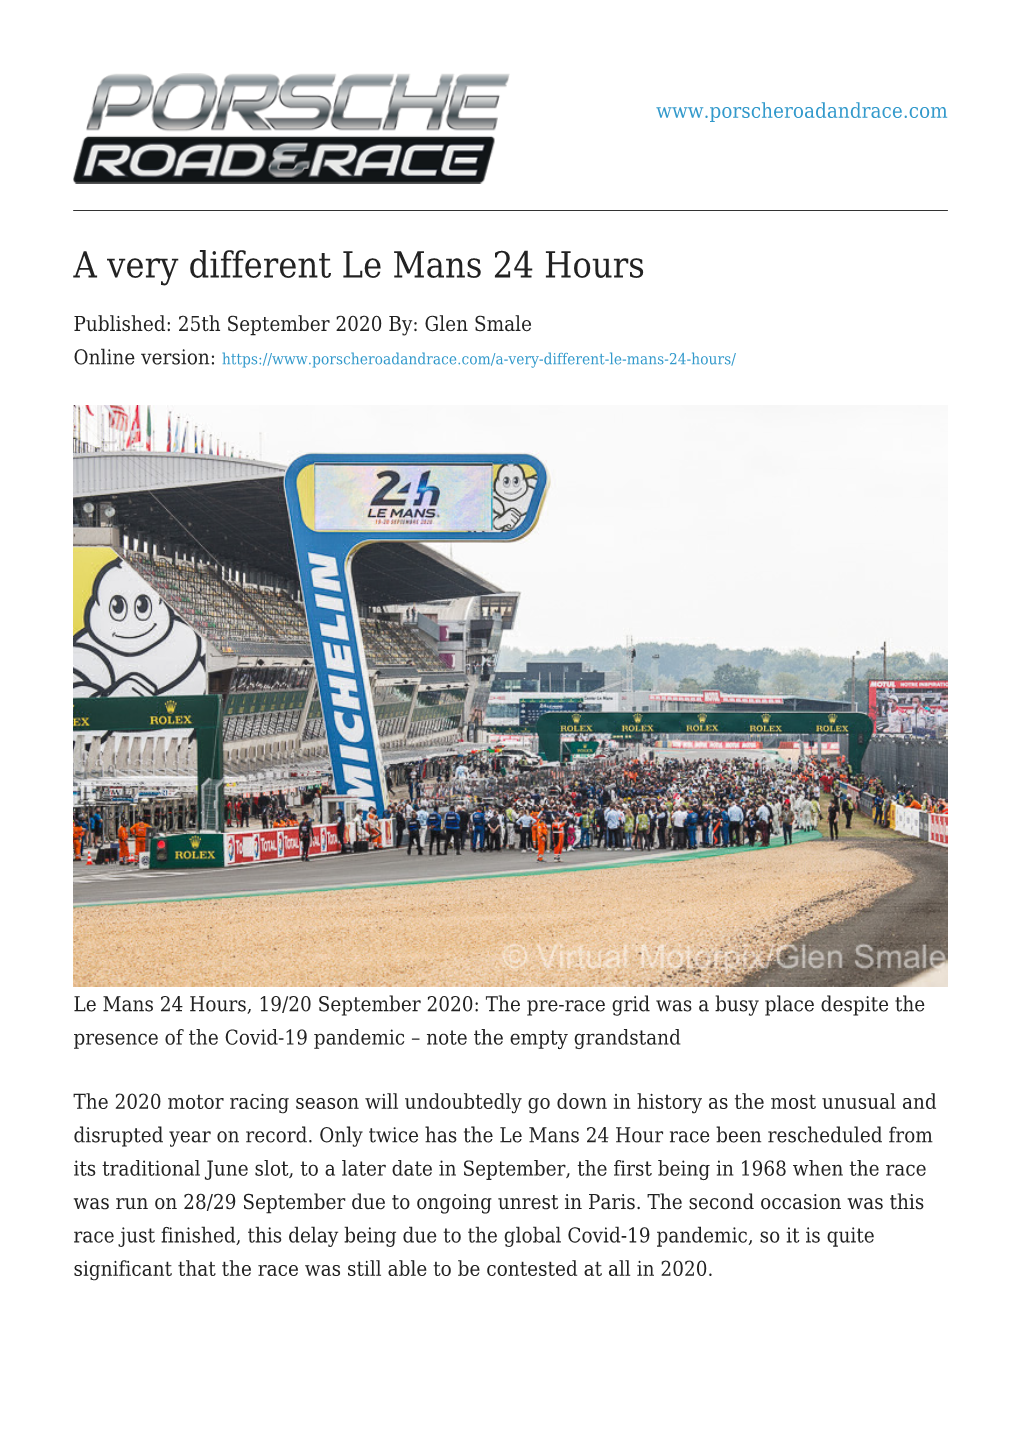 A Very Different Le Mans 24 Hours